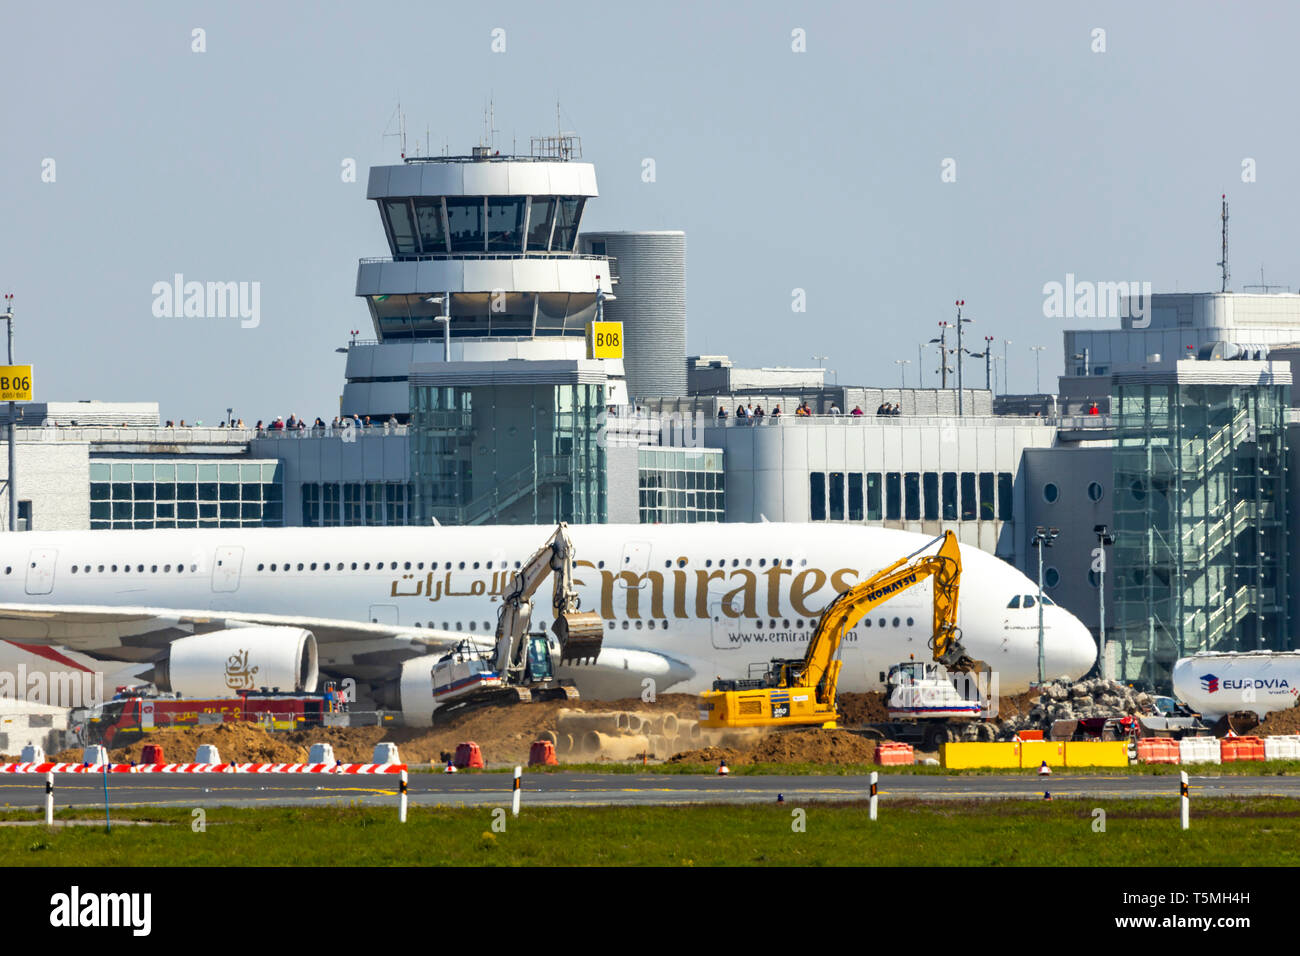 Dusseldorf International Airport, DUS, construction work at the airport apron, Tower, Emirates, Airbus A380-800, Stock Photo